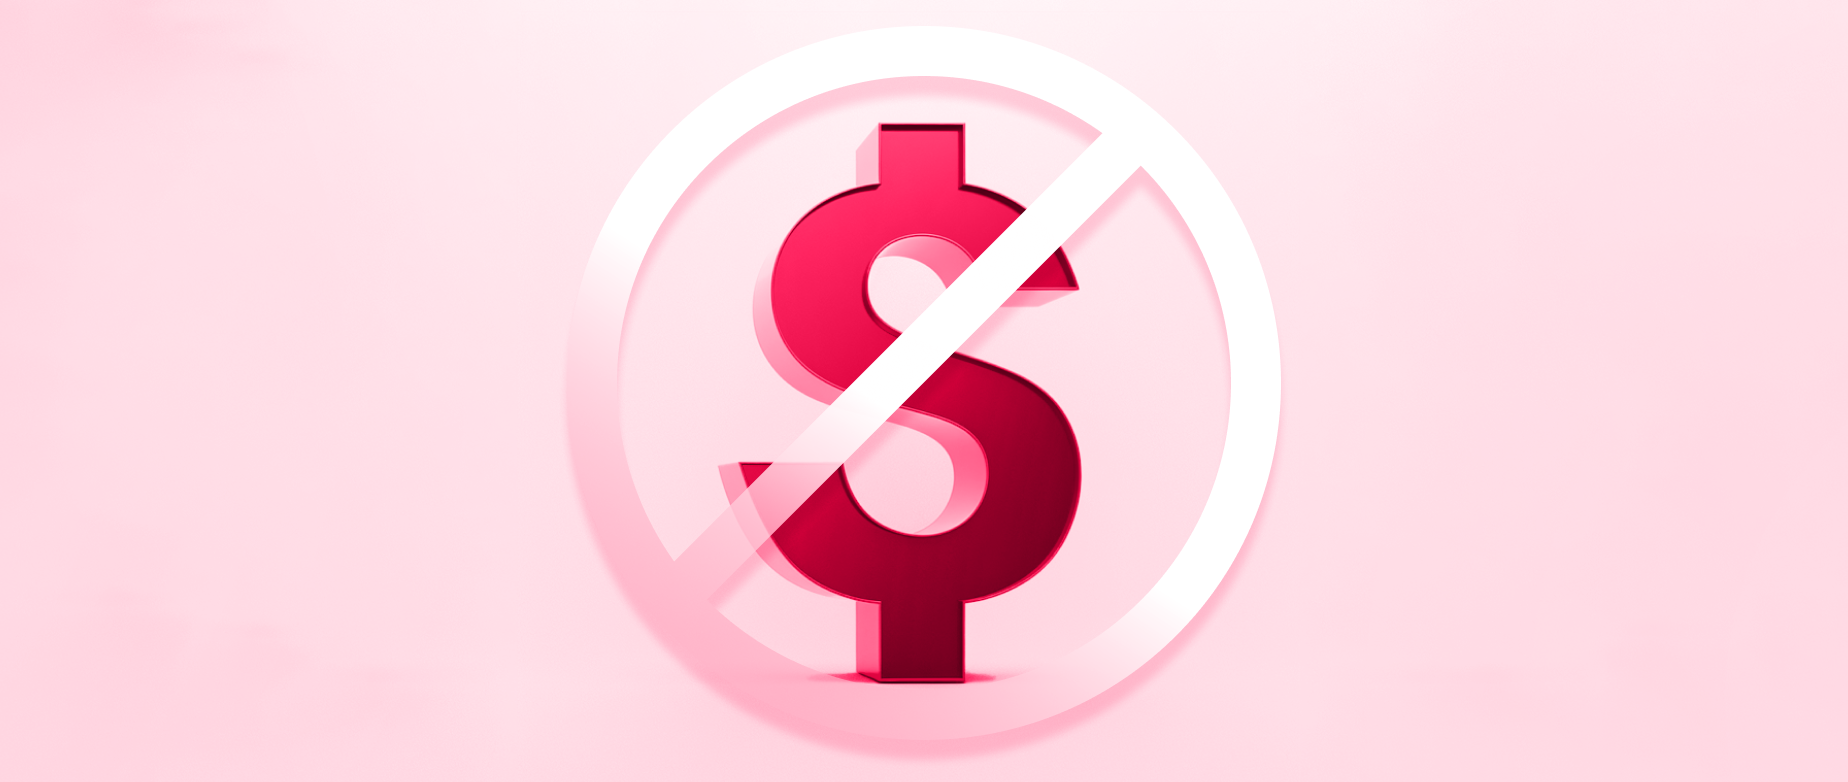 A graphic dollar sign with a strikethrough over top indicating "no money"